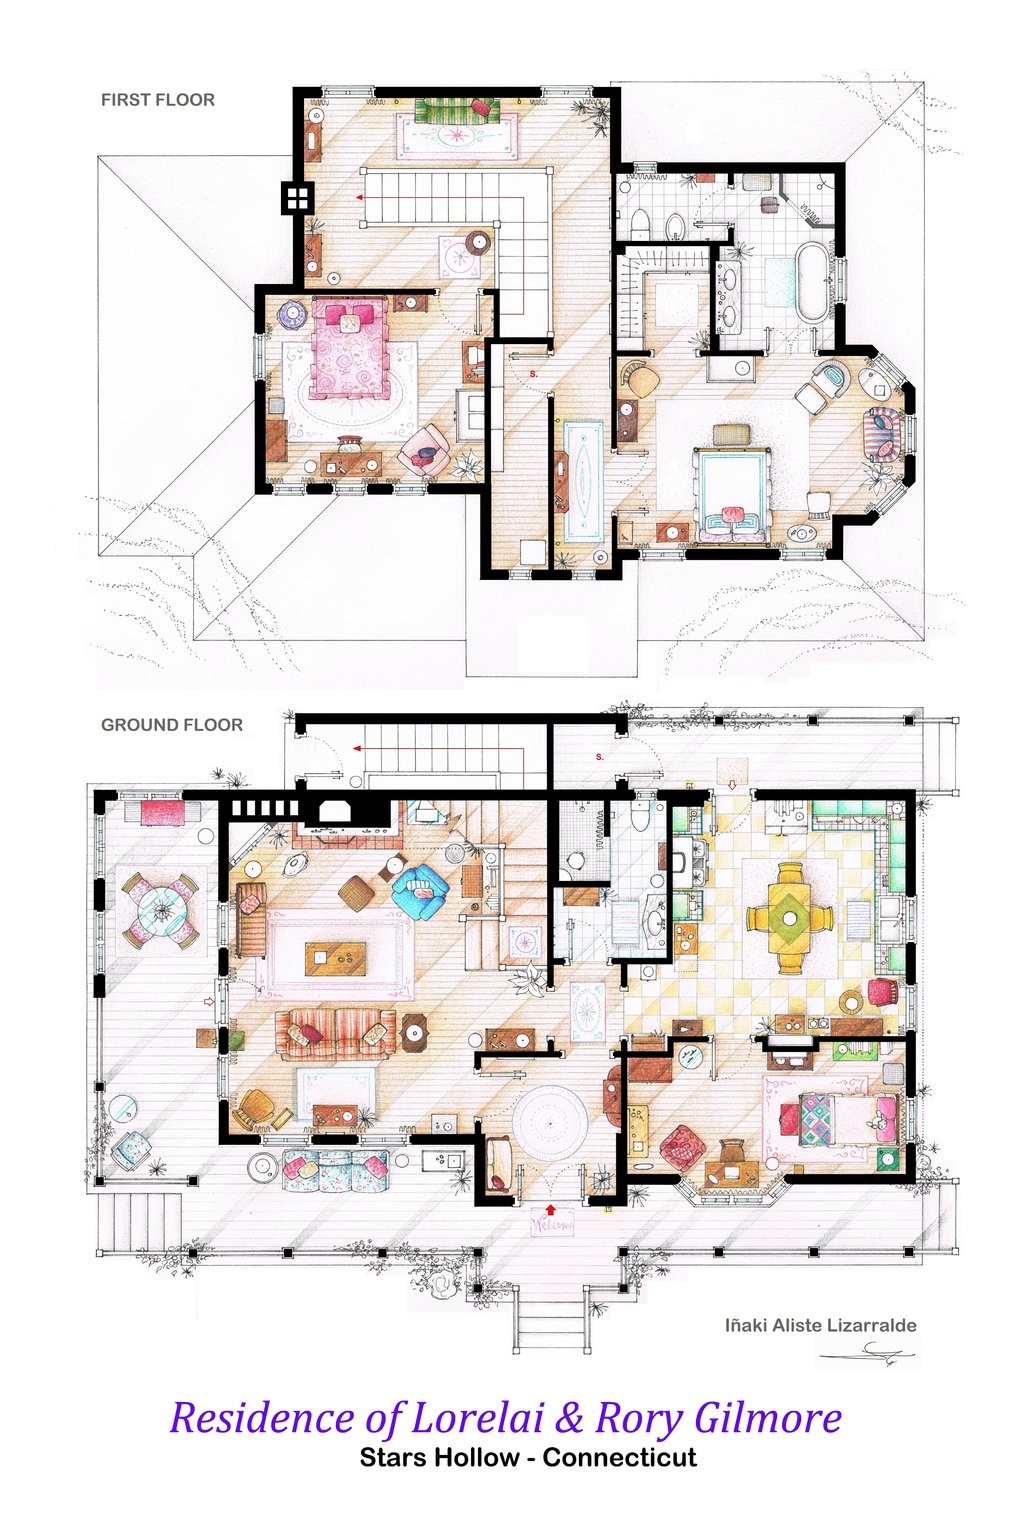 house_of_lorelai_and_rory_gilmore___floorplans_by_nikneuk-d5to28r.jpg